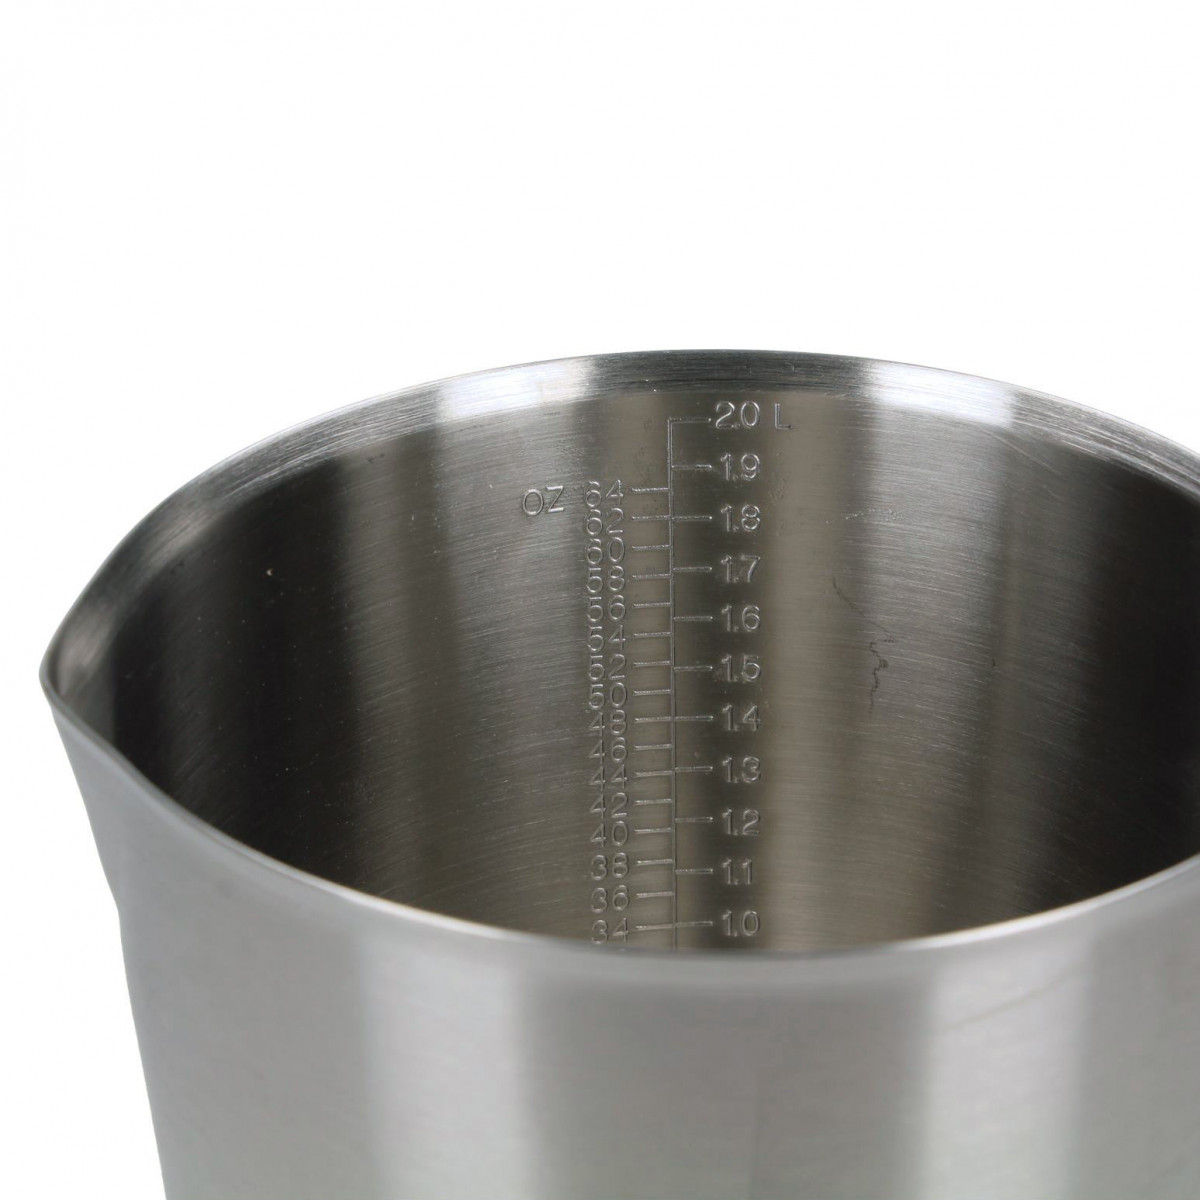 Graduated SST measuring cup - 2,000 ml